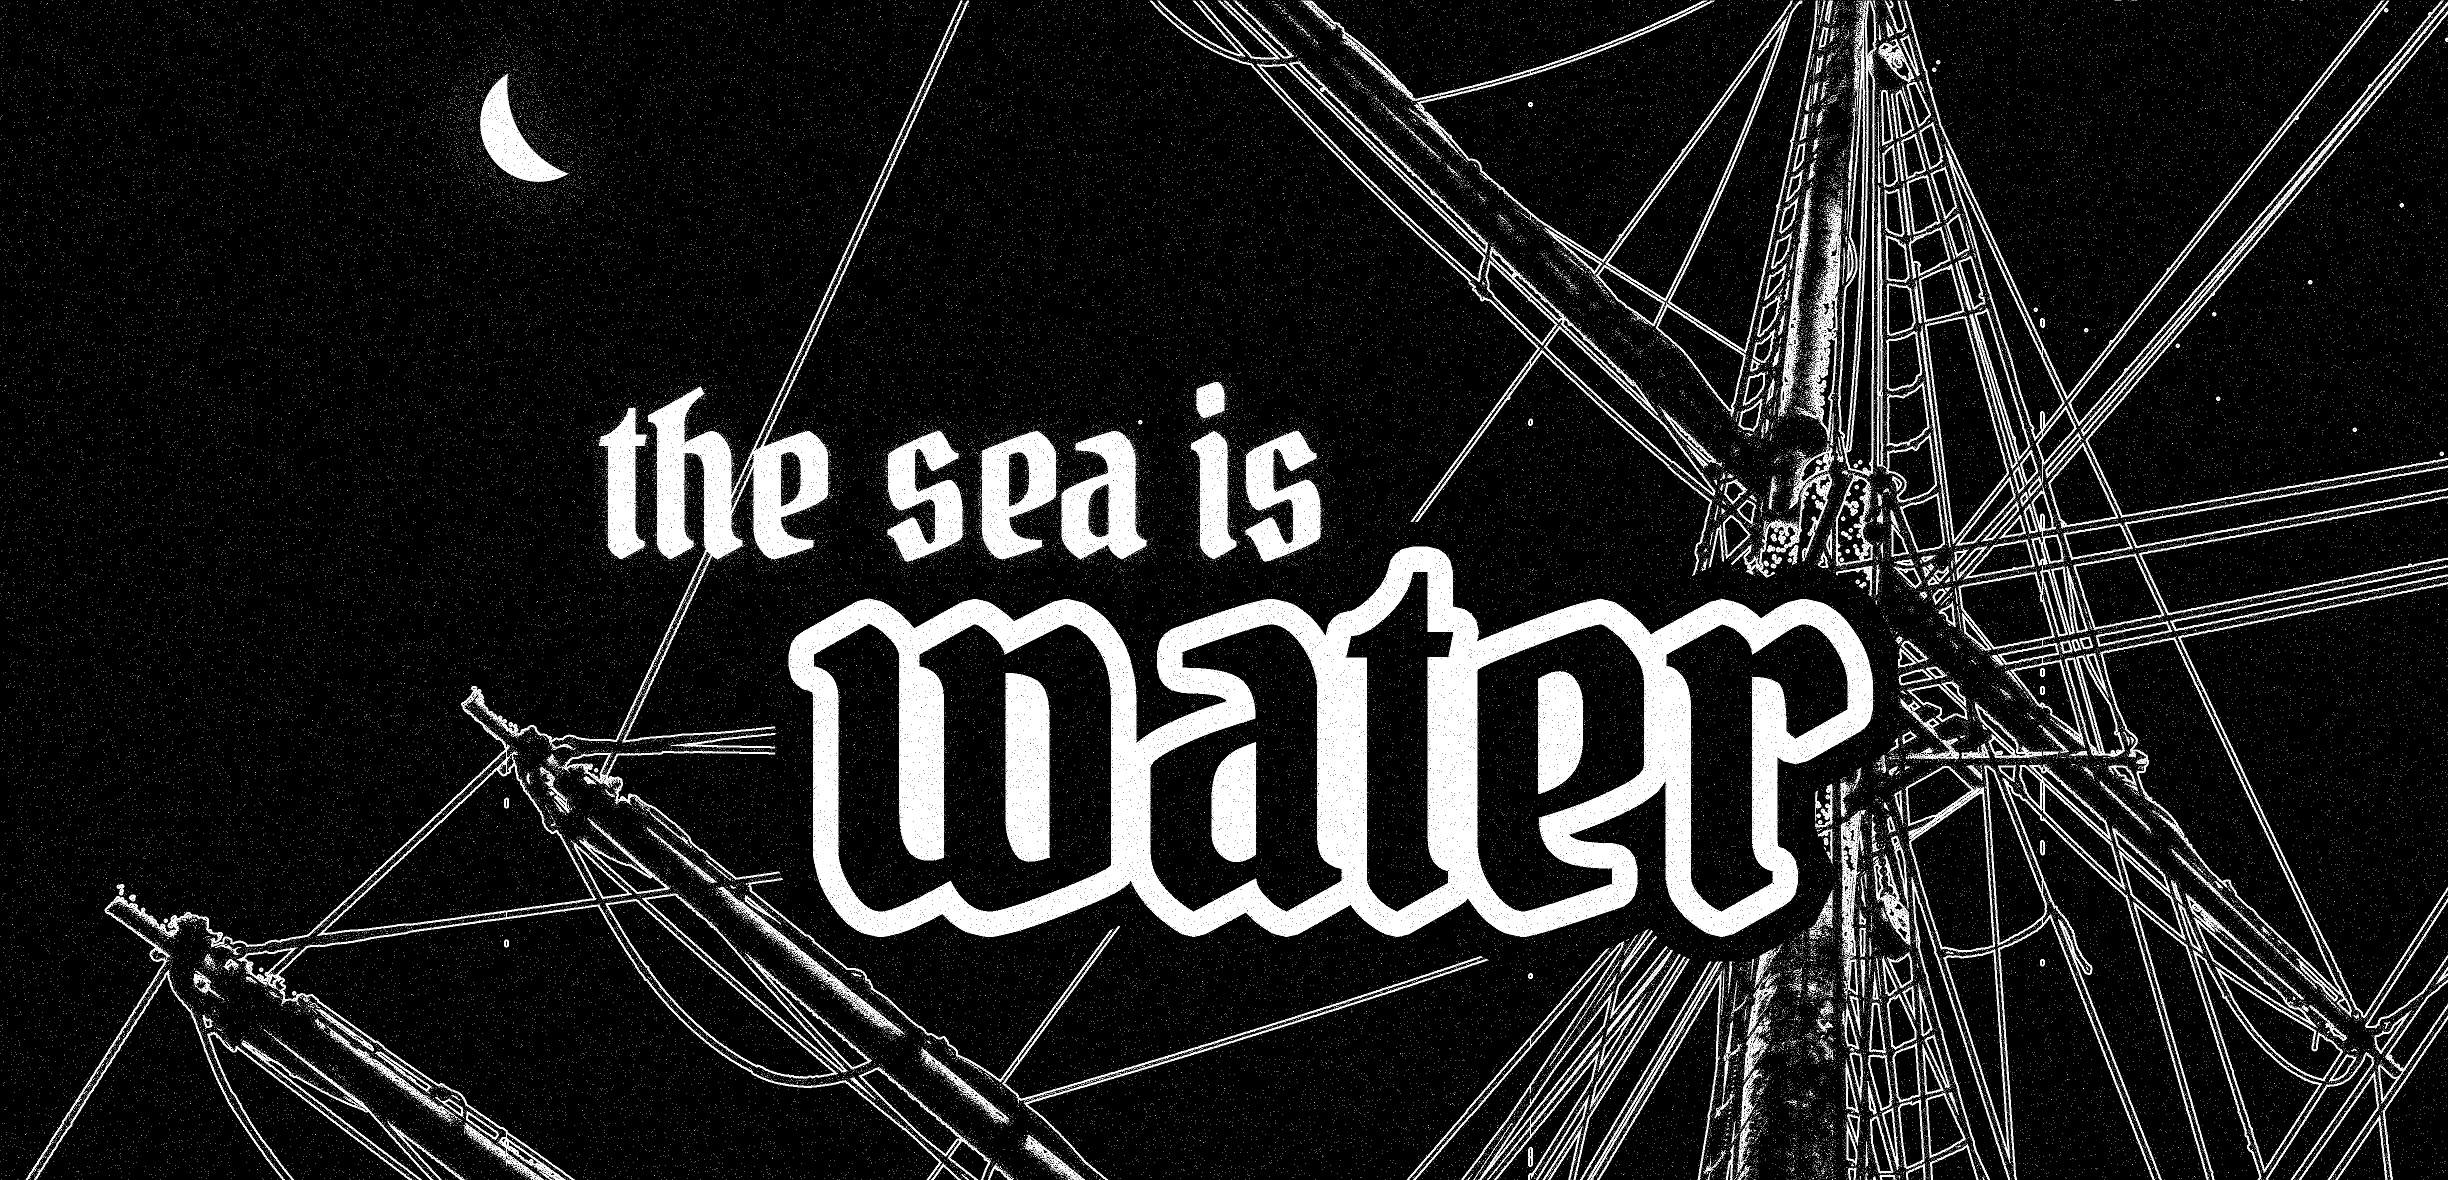 The Sea is Water